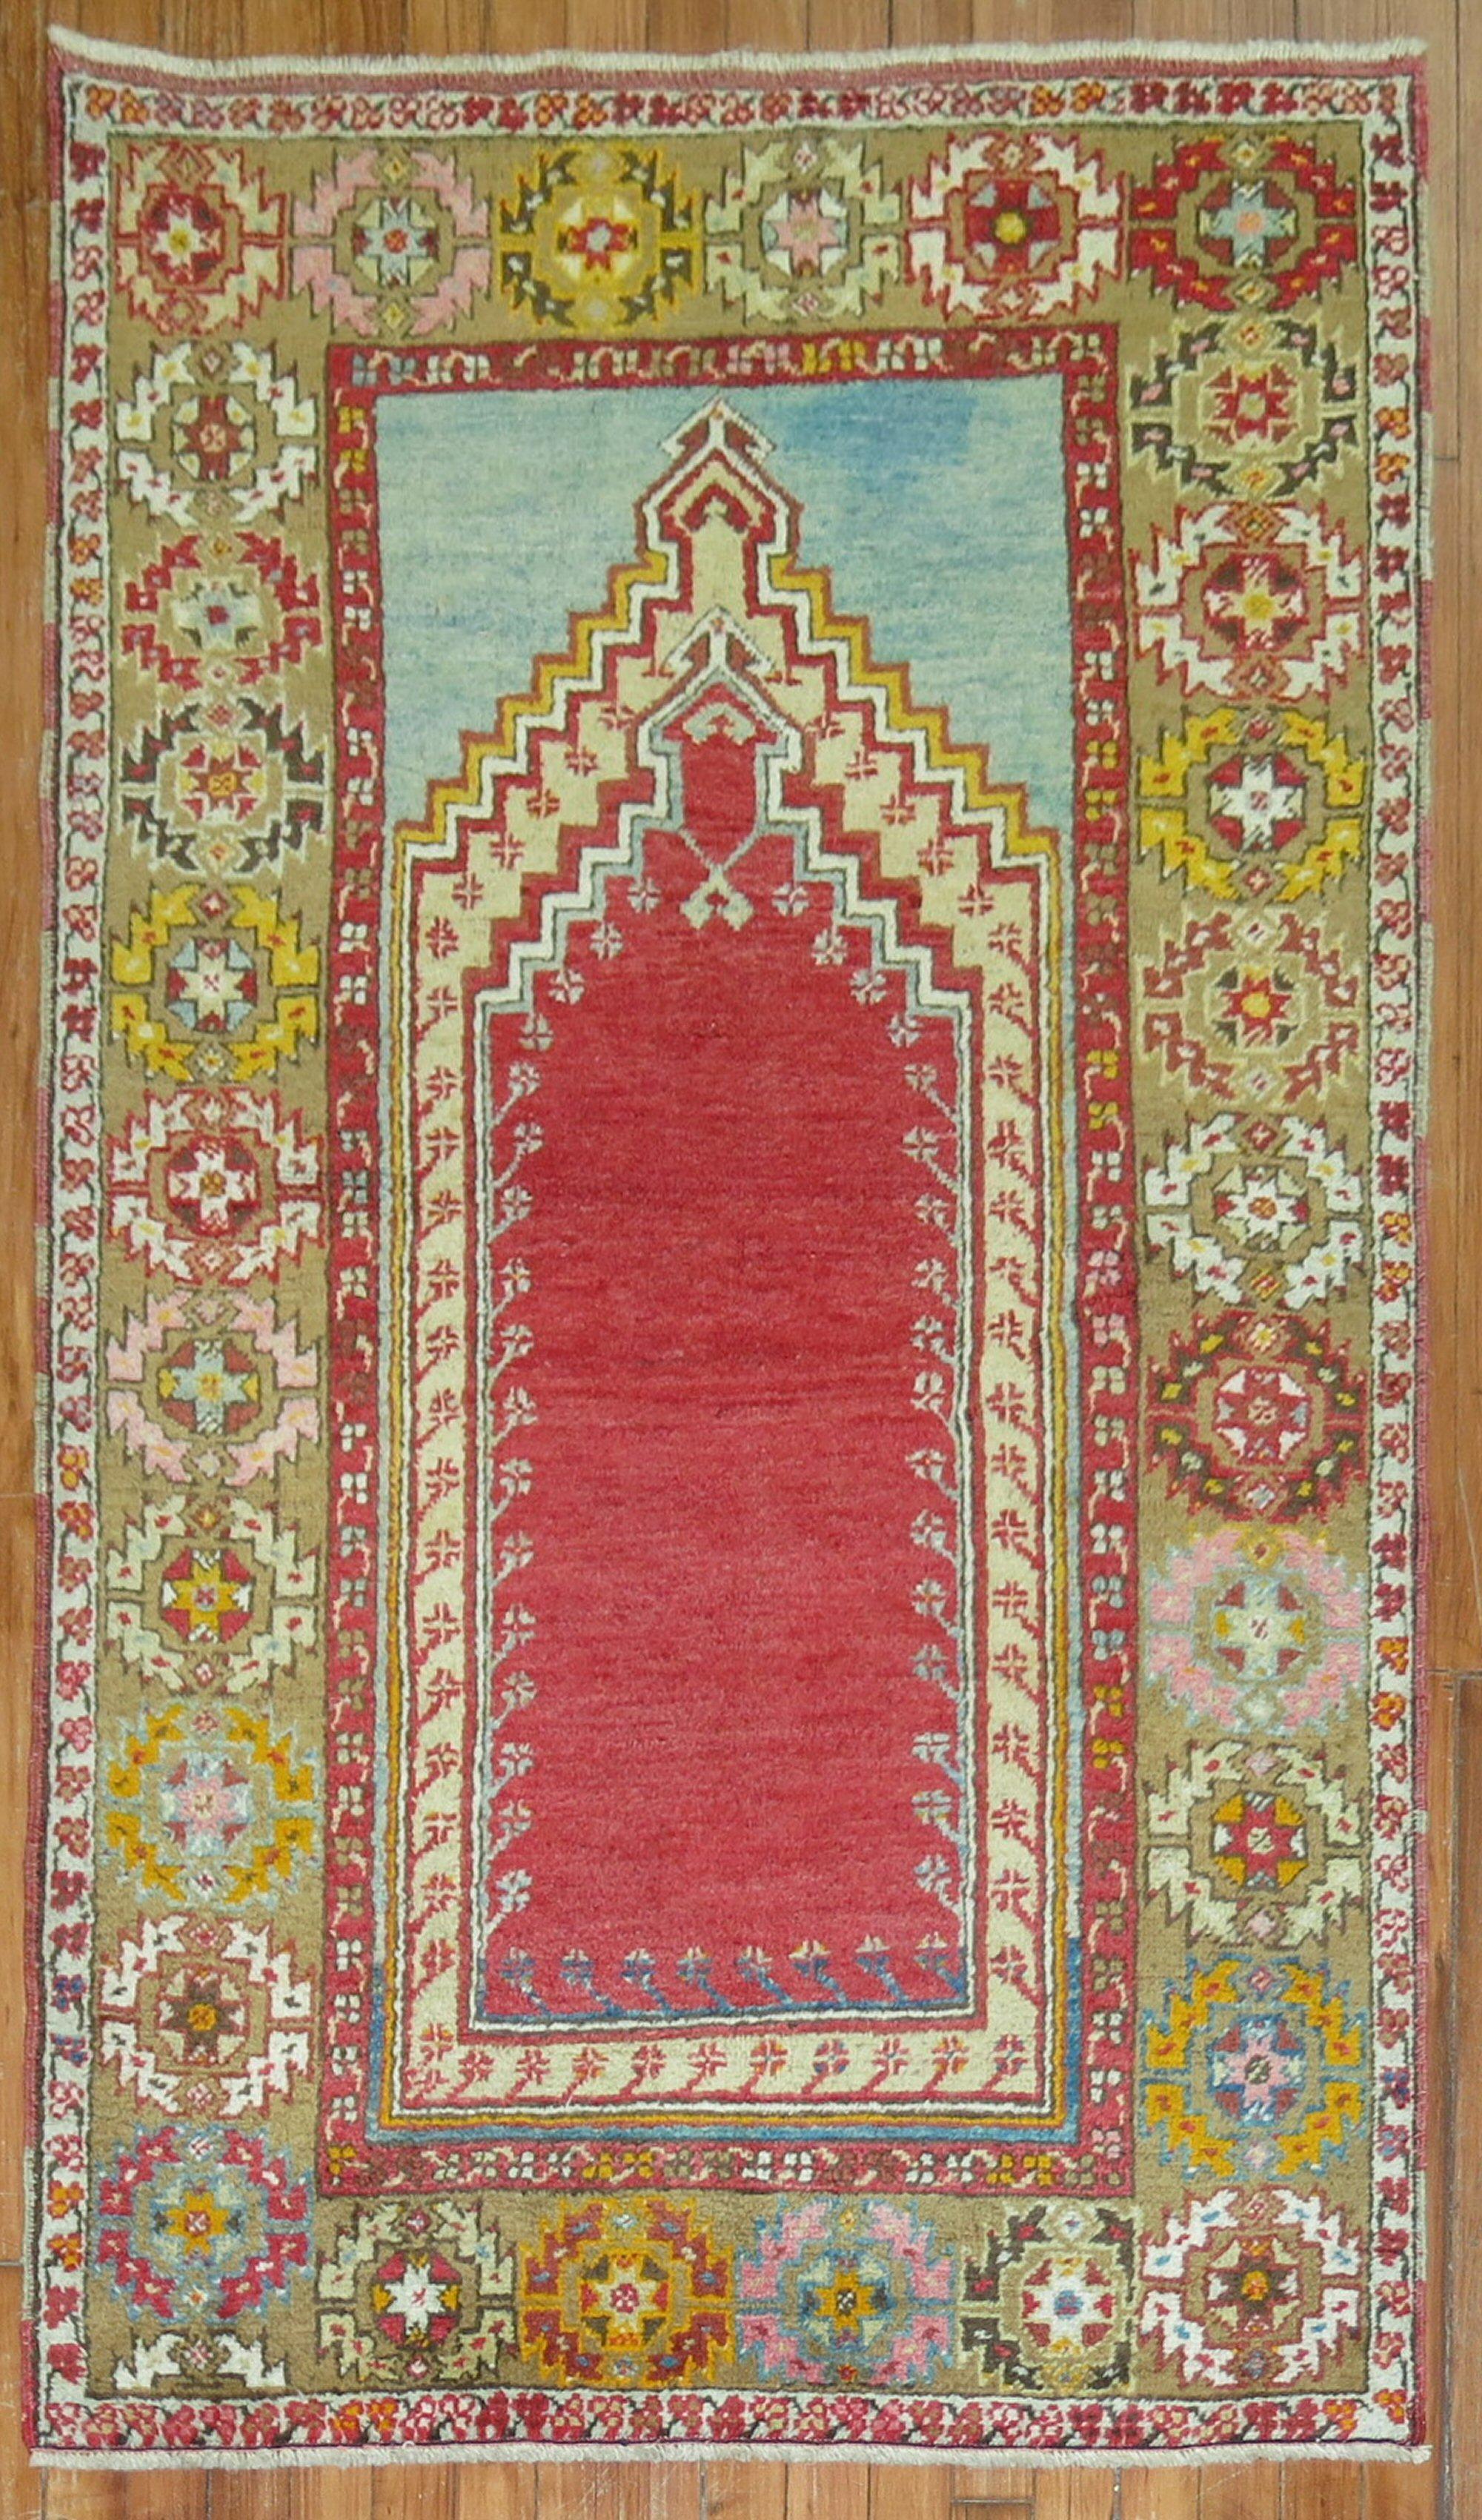 Mid 20th century colorful Turkish Melas rug in bright colors highlighted by a mihrab prayer niche design

Measures: 3'3